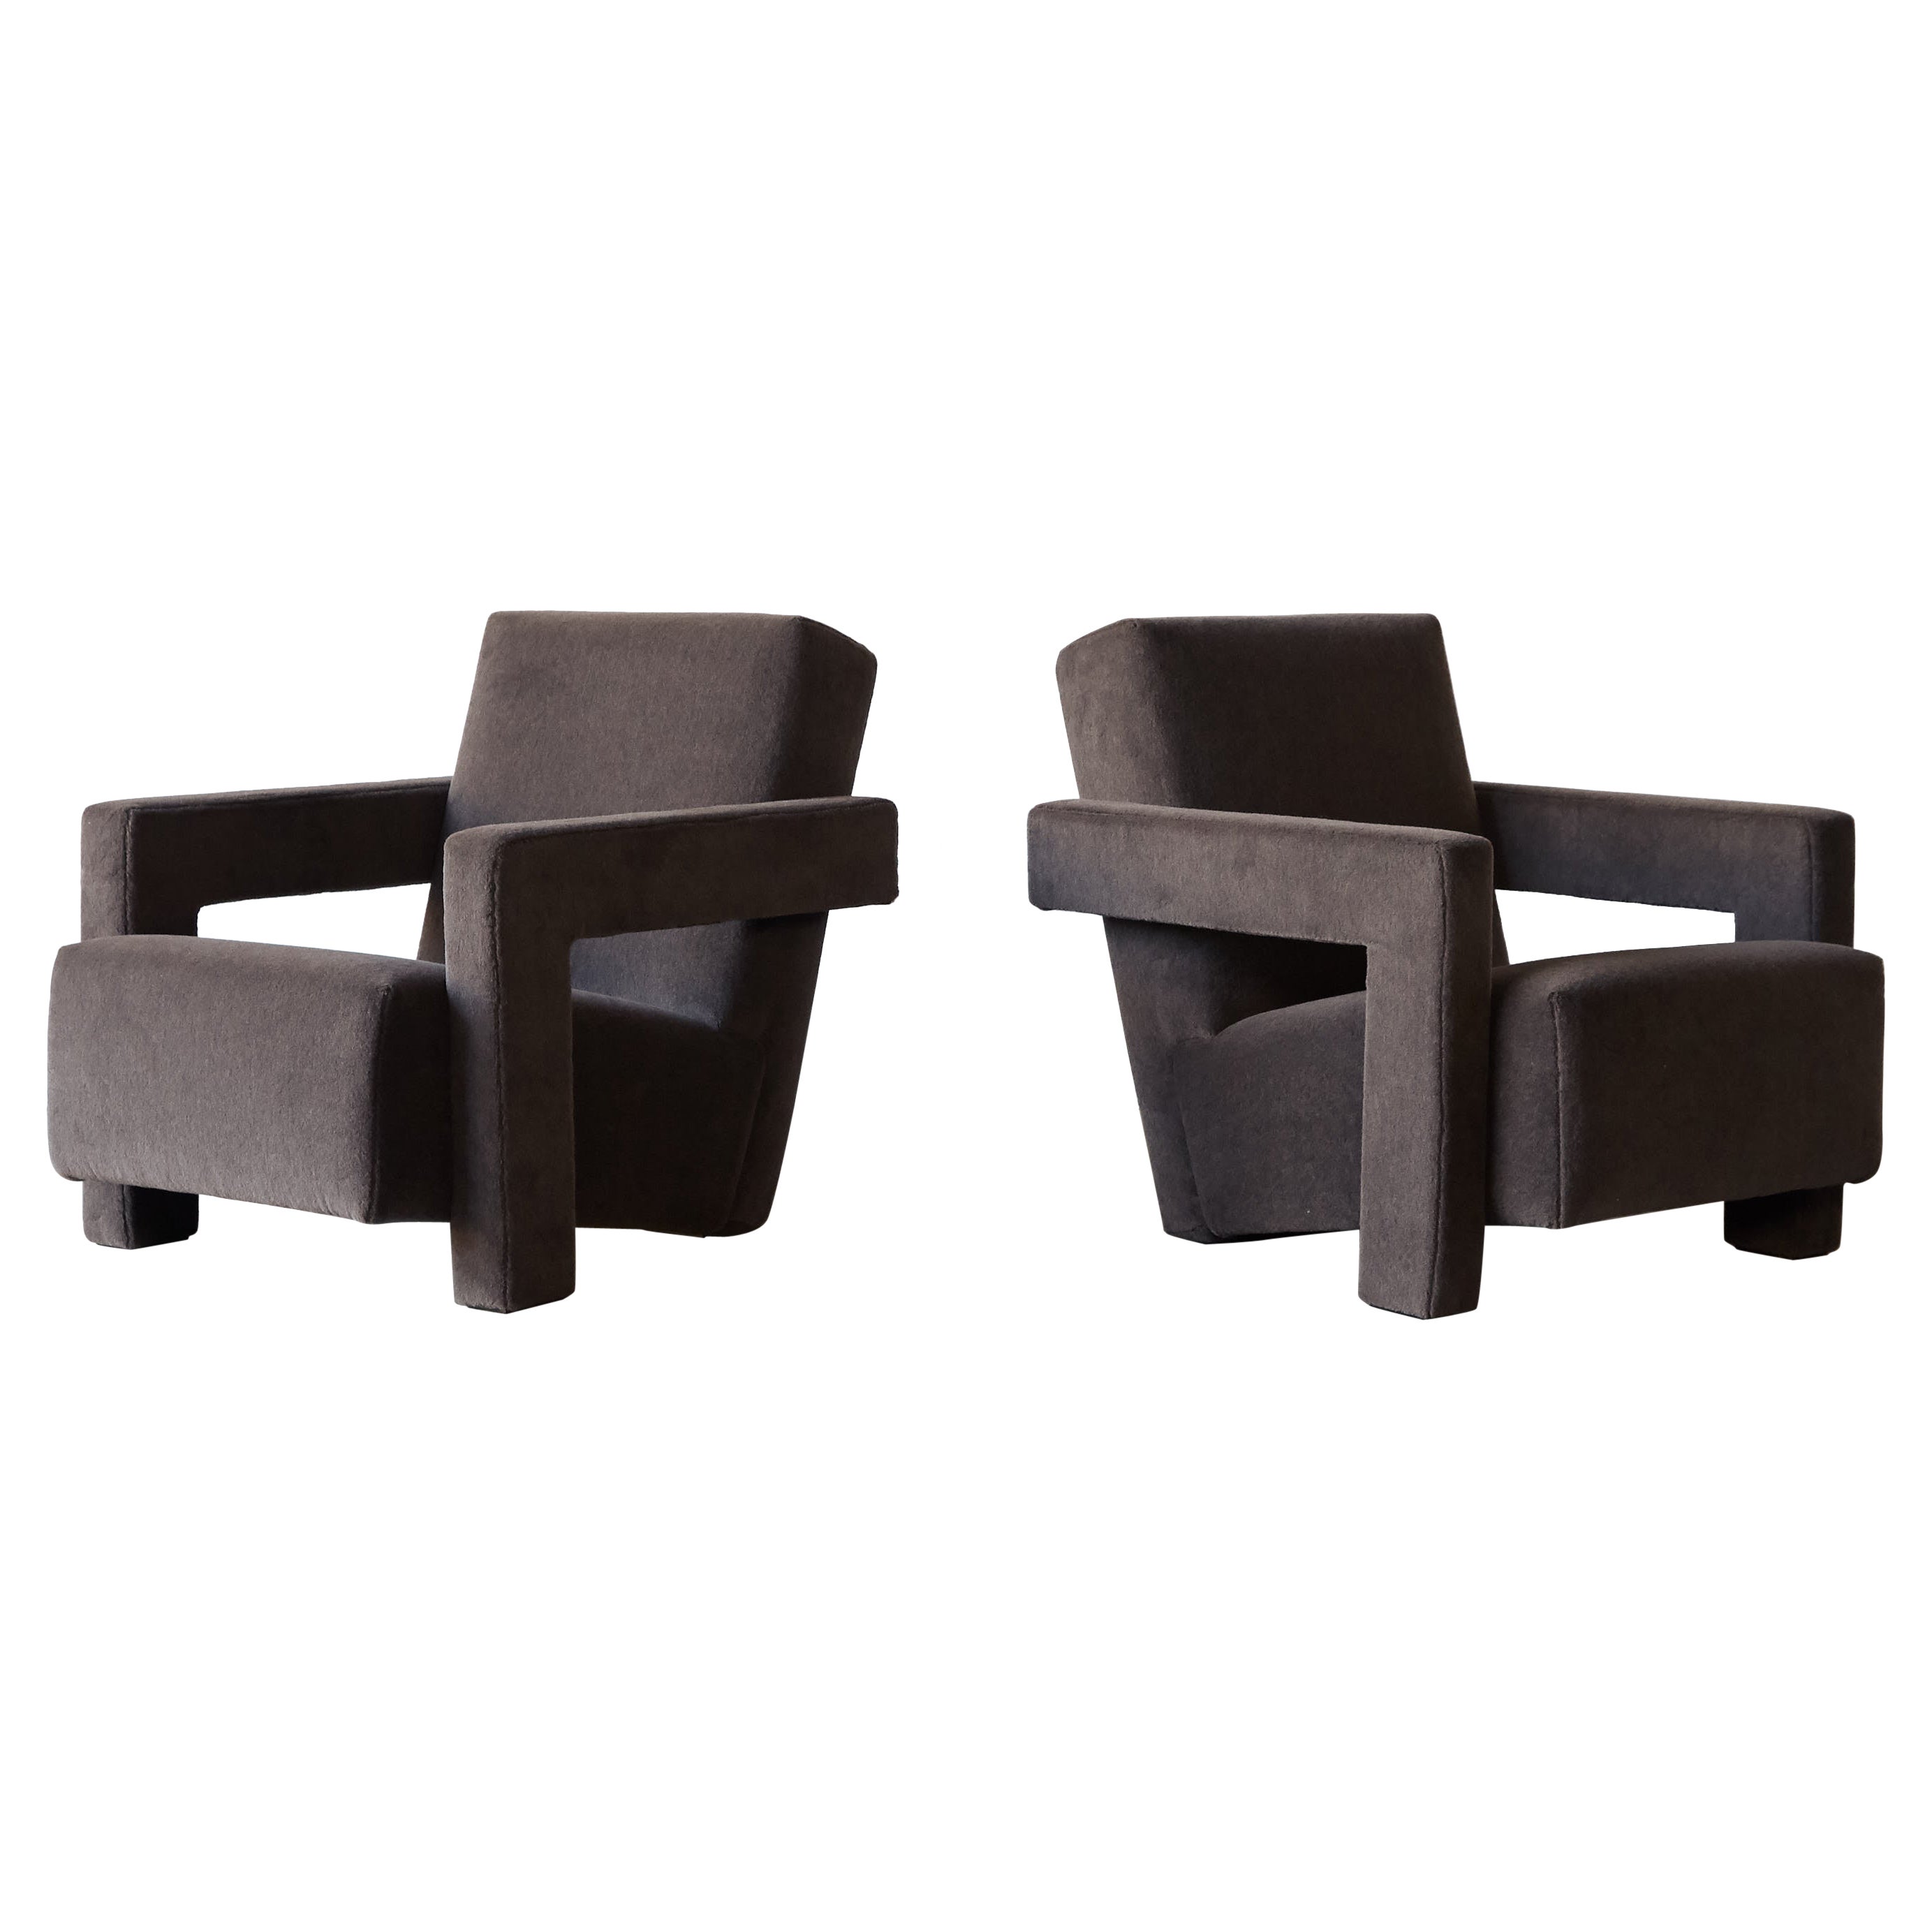 Gerrit Rietveld Utrecht Chairs, Cassina, Newly Upholstered in Pure Alpaca For Sale